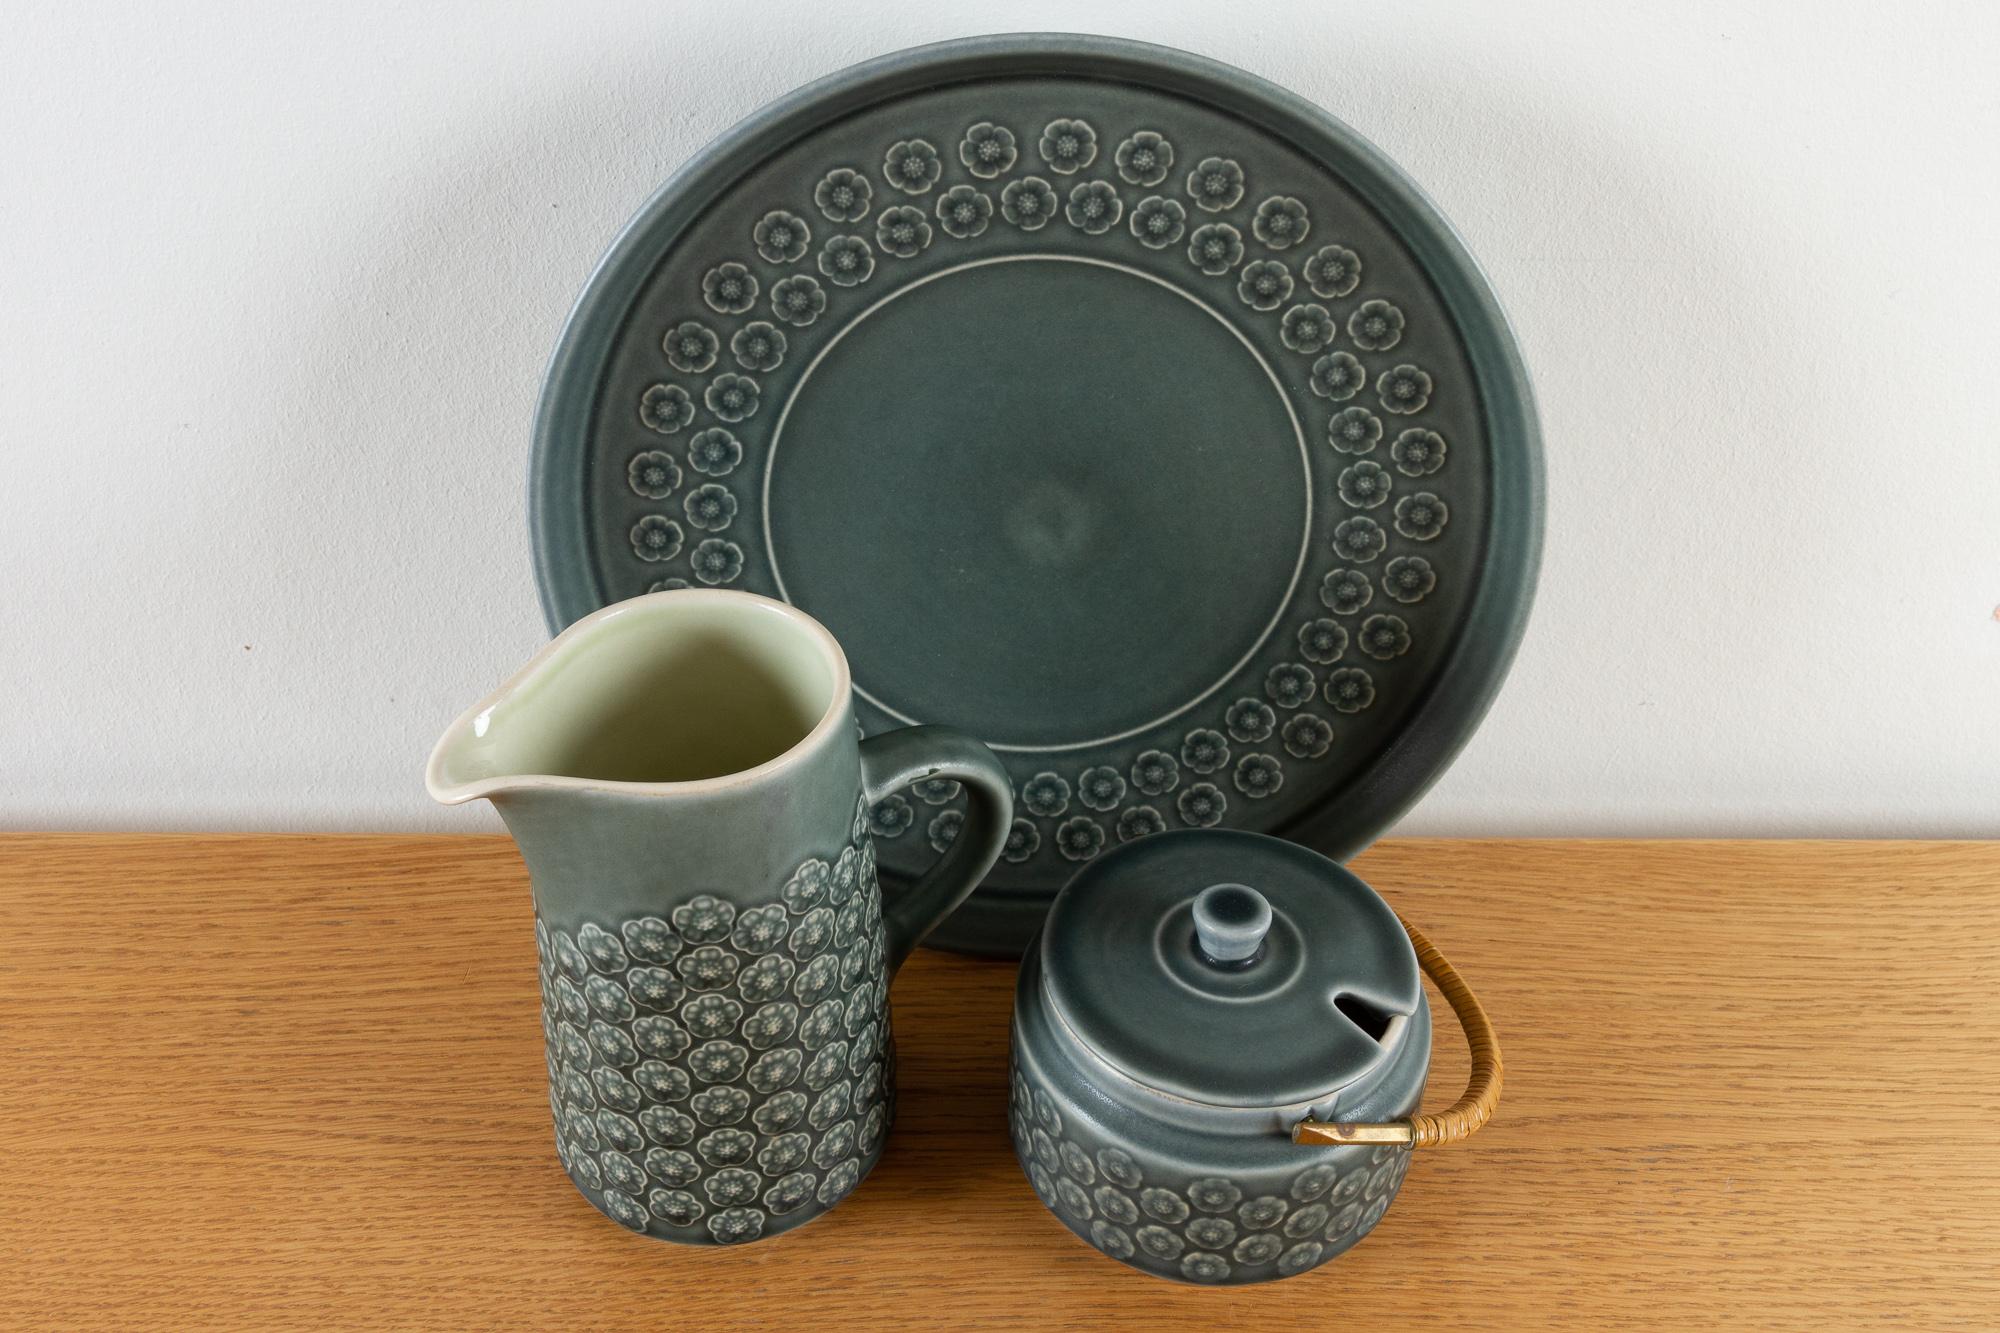 Vintage Danish Azur Stoneware by Jens H. Quistgaard for Kronjyden, 1960s

Three pieces of Azur stoneware from the early production at Kronjyden, Denmark.
One plate/serving dish, one milk jug and one marmalade or sugar bowl with lid and cane